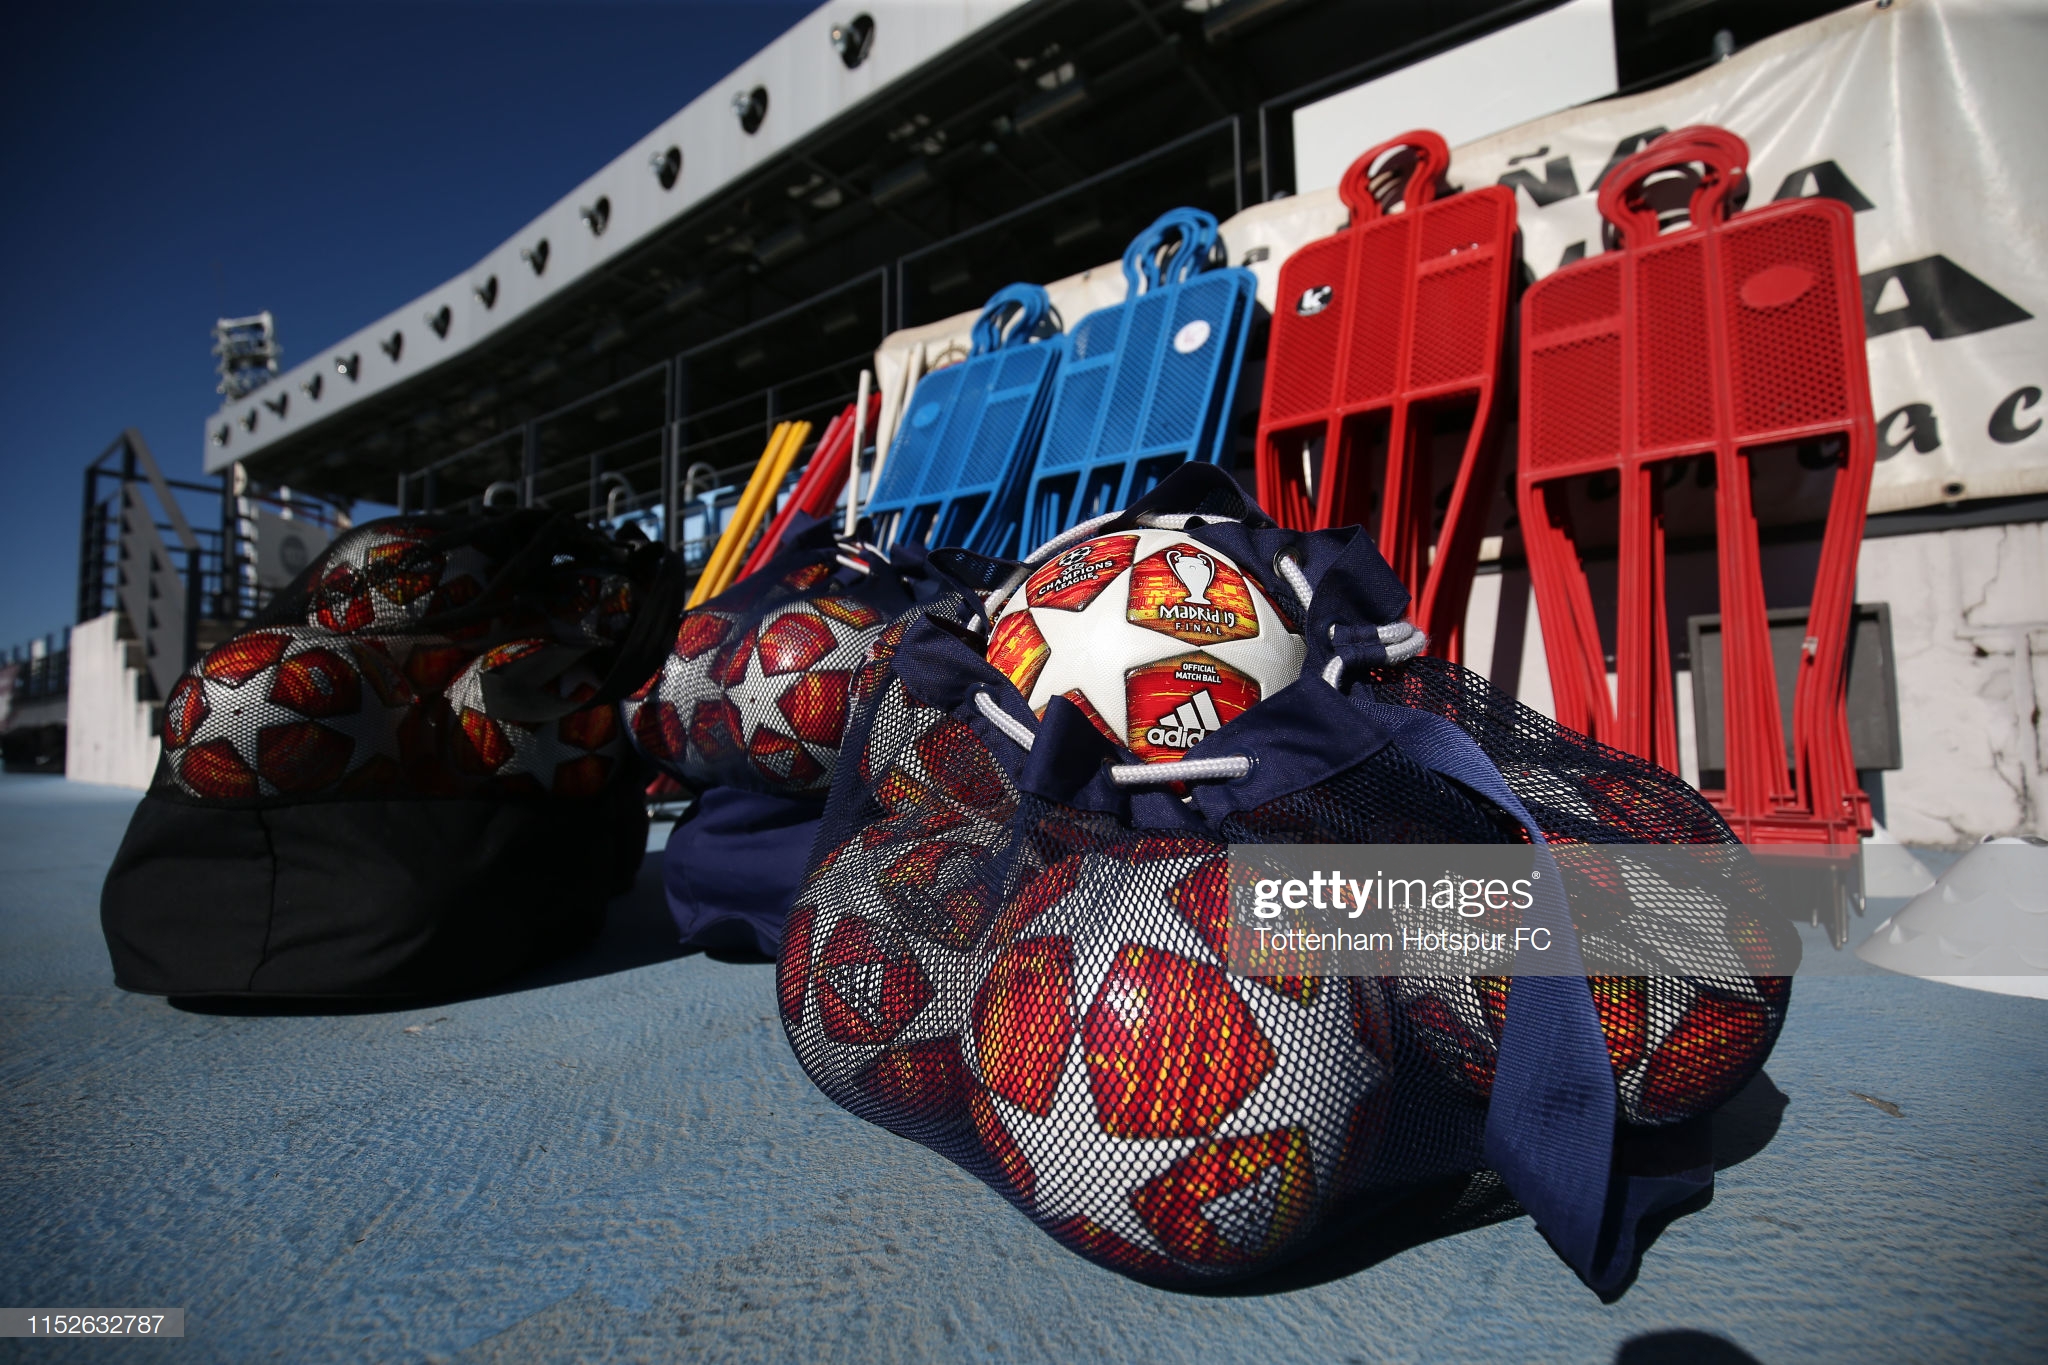 gettyimages-1152632787-2048x2048.jpg